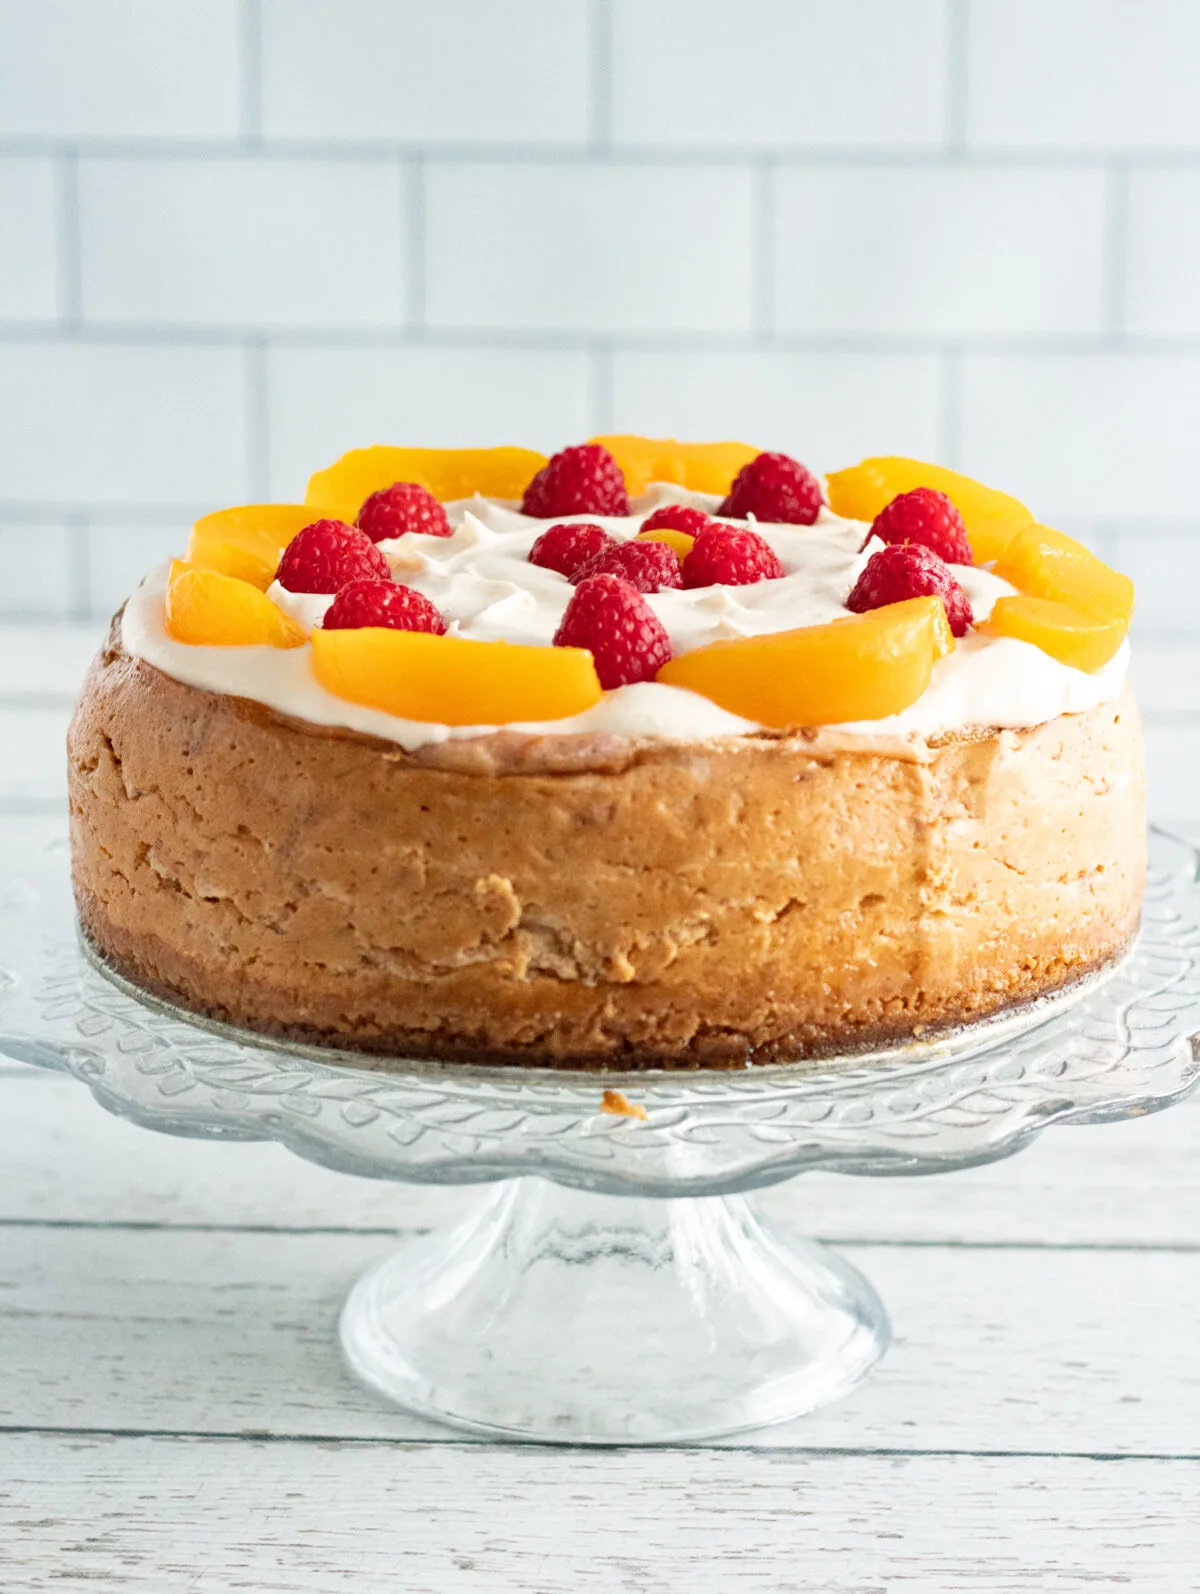 Sweet and creamy, this Instant Pot Peach Melba Cheesecake is filled with fresh peaches & raspberries then topped with a cream cheese frosting.